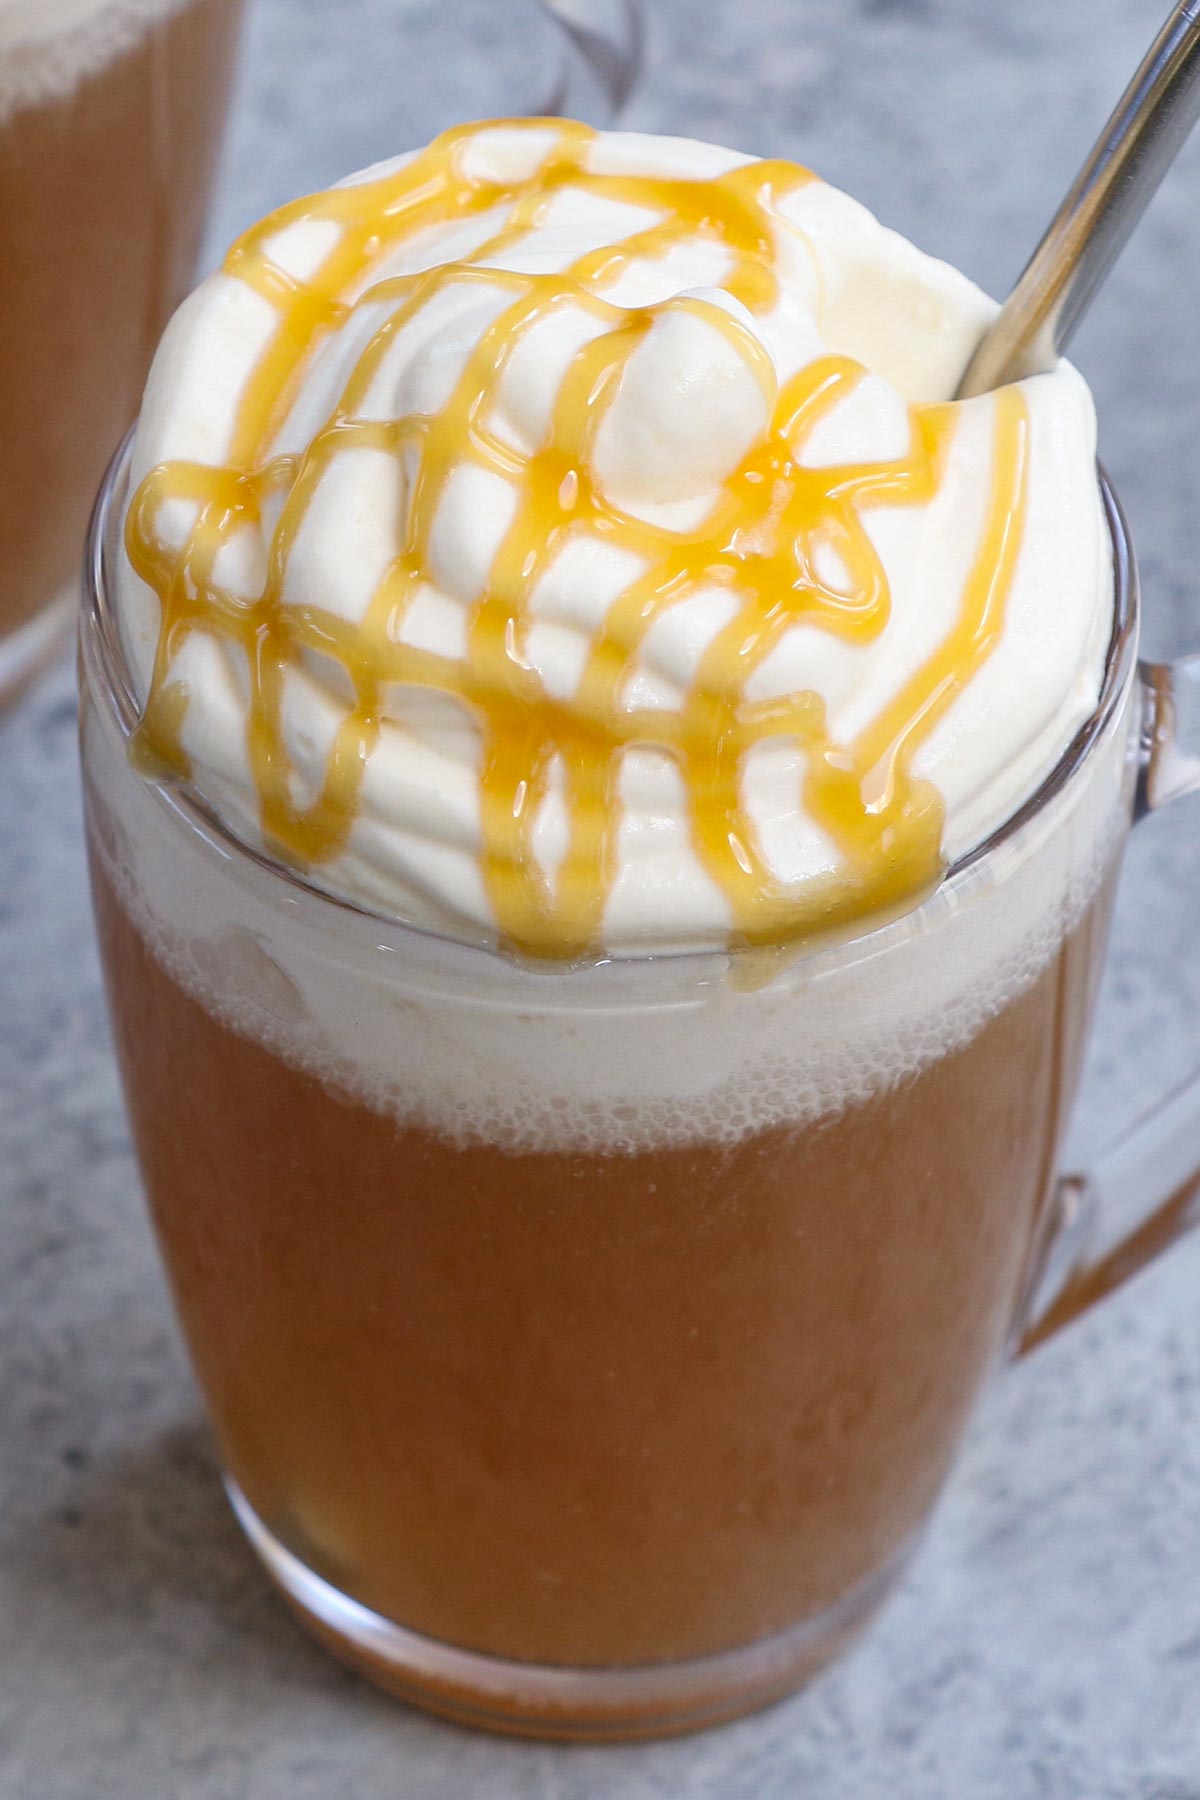 Add a little magic to your life with this recipe straight out of the Wizarding World. Contrary to what the name might imply, this Harry Potter Butterbeer is non-alcoholic, making it the perfect fun treat for the whole family to enjoy. It’s made from cream soda topped with a butterscotch whipped cream and can be prepared in just a few minutes...almost like magic.